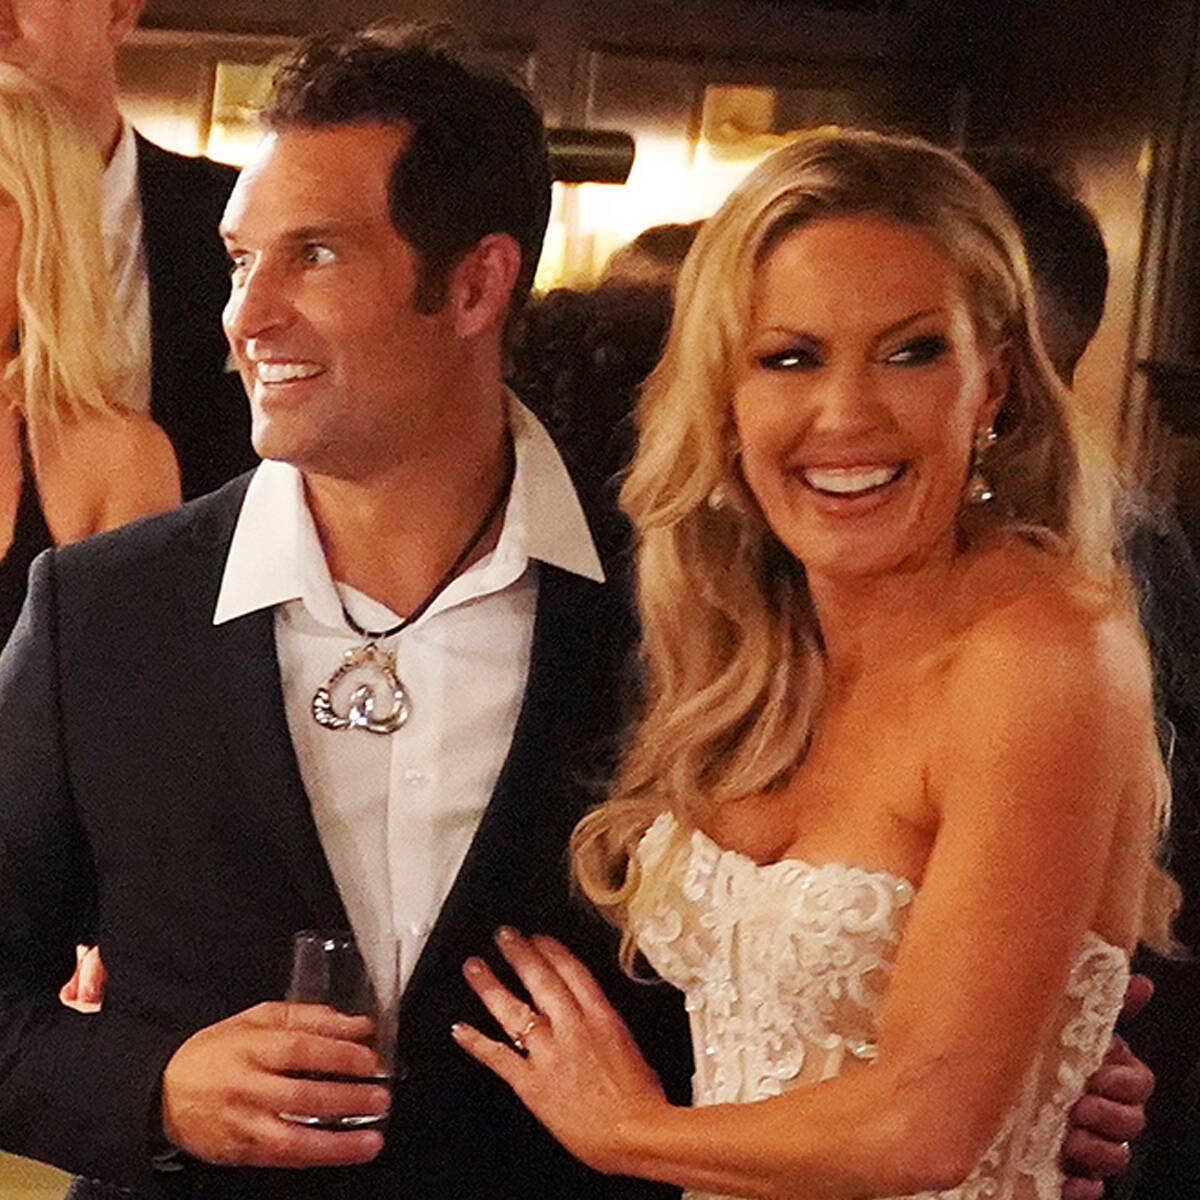 RHOC's Braunwyn Windham-Burke Responds to Backlash Over Not Wanting Husband Sean to Find Love